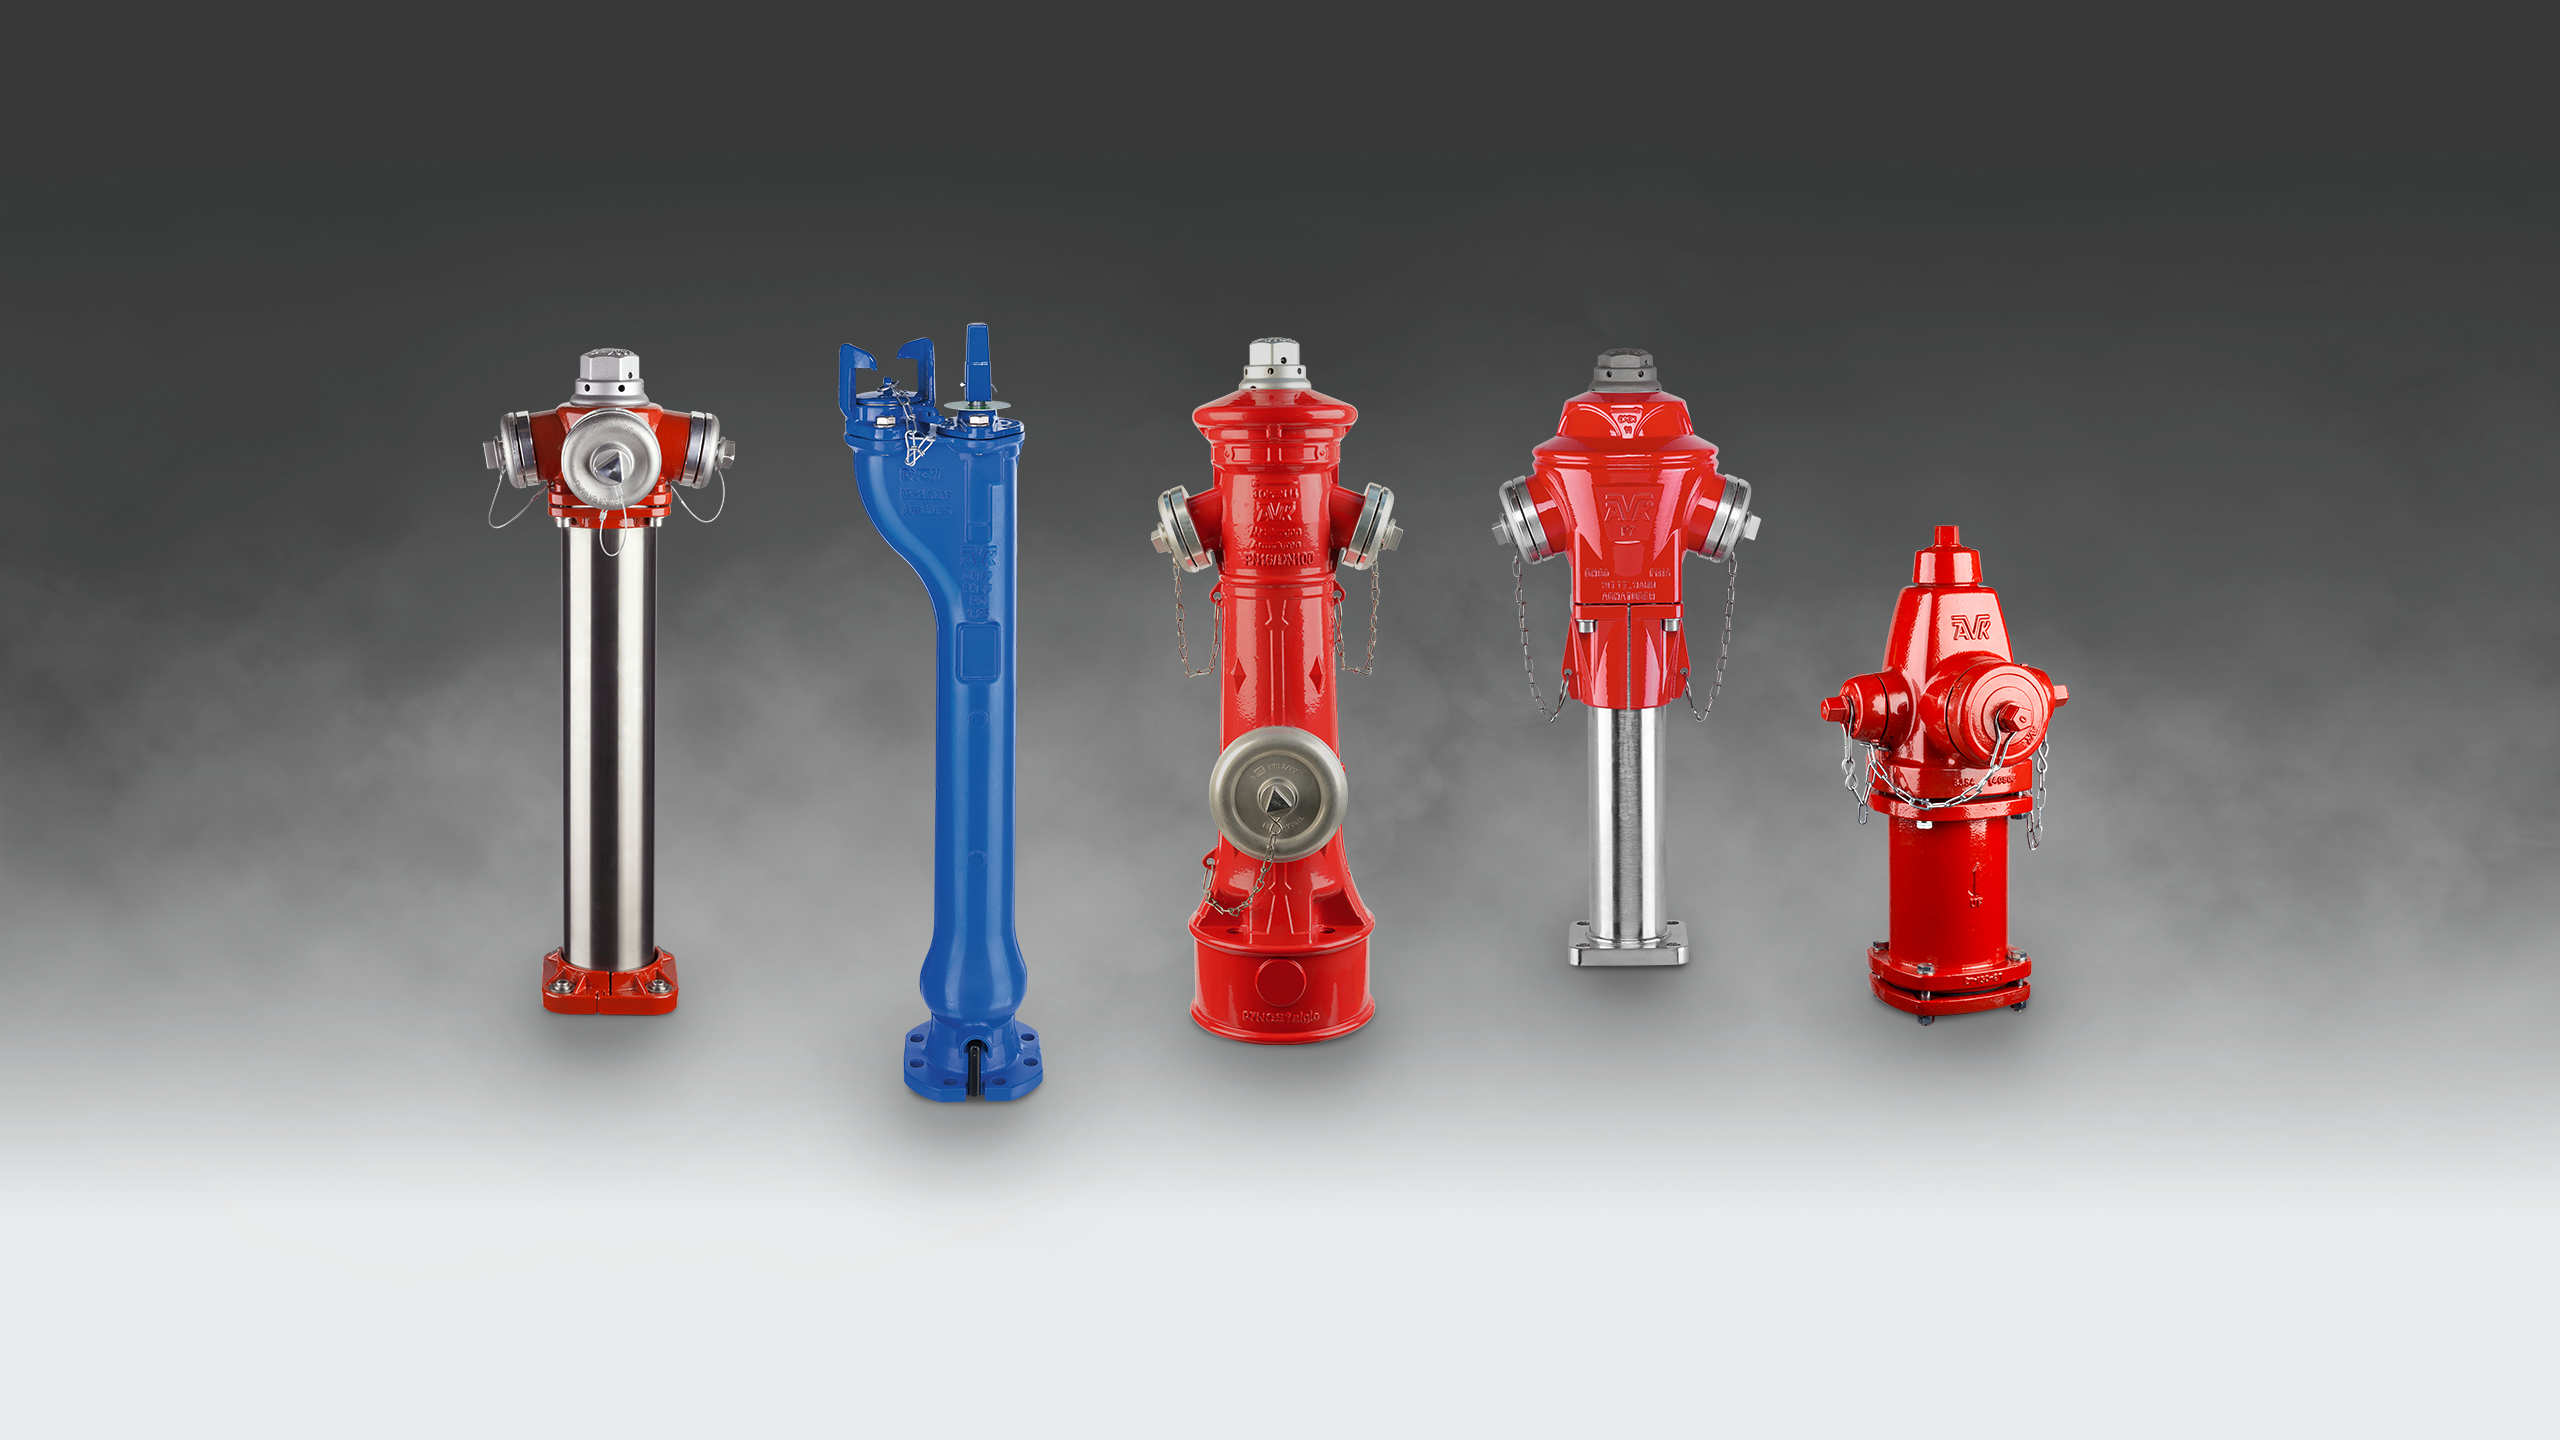 Fire protection - different AVK hydrants